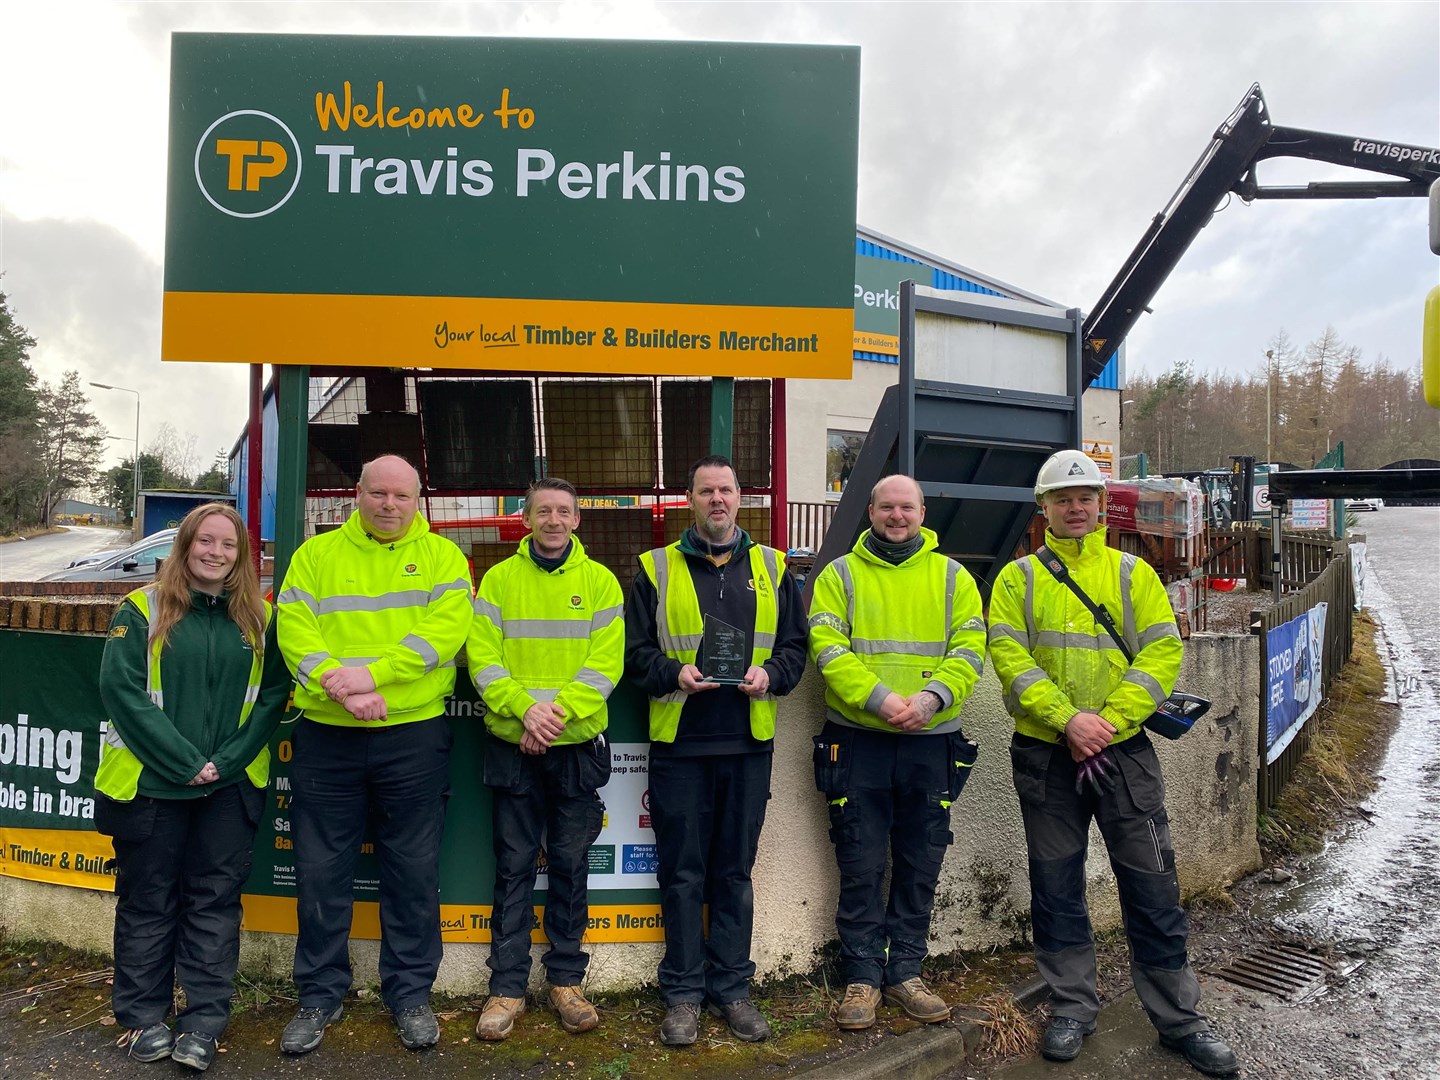 The local Travis Perkins branch in Grantown was voted best branch in North of Scotland for 2021 out of 12 in the region.